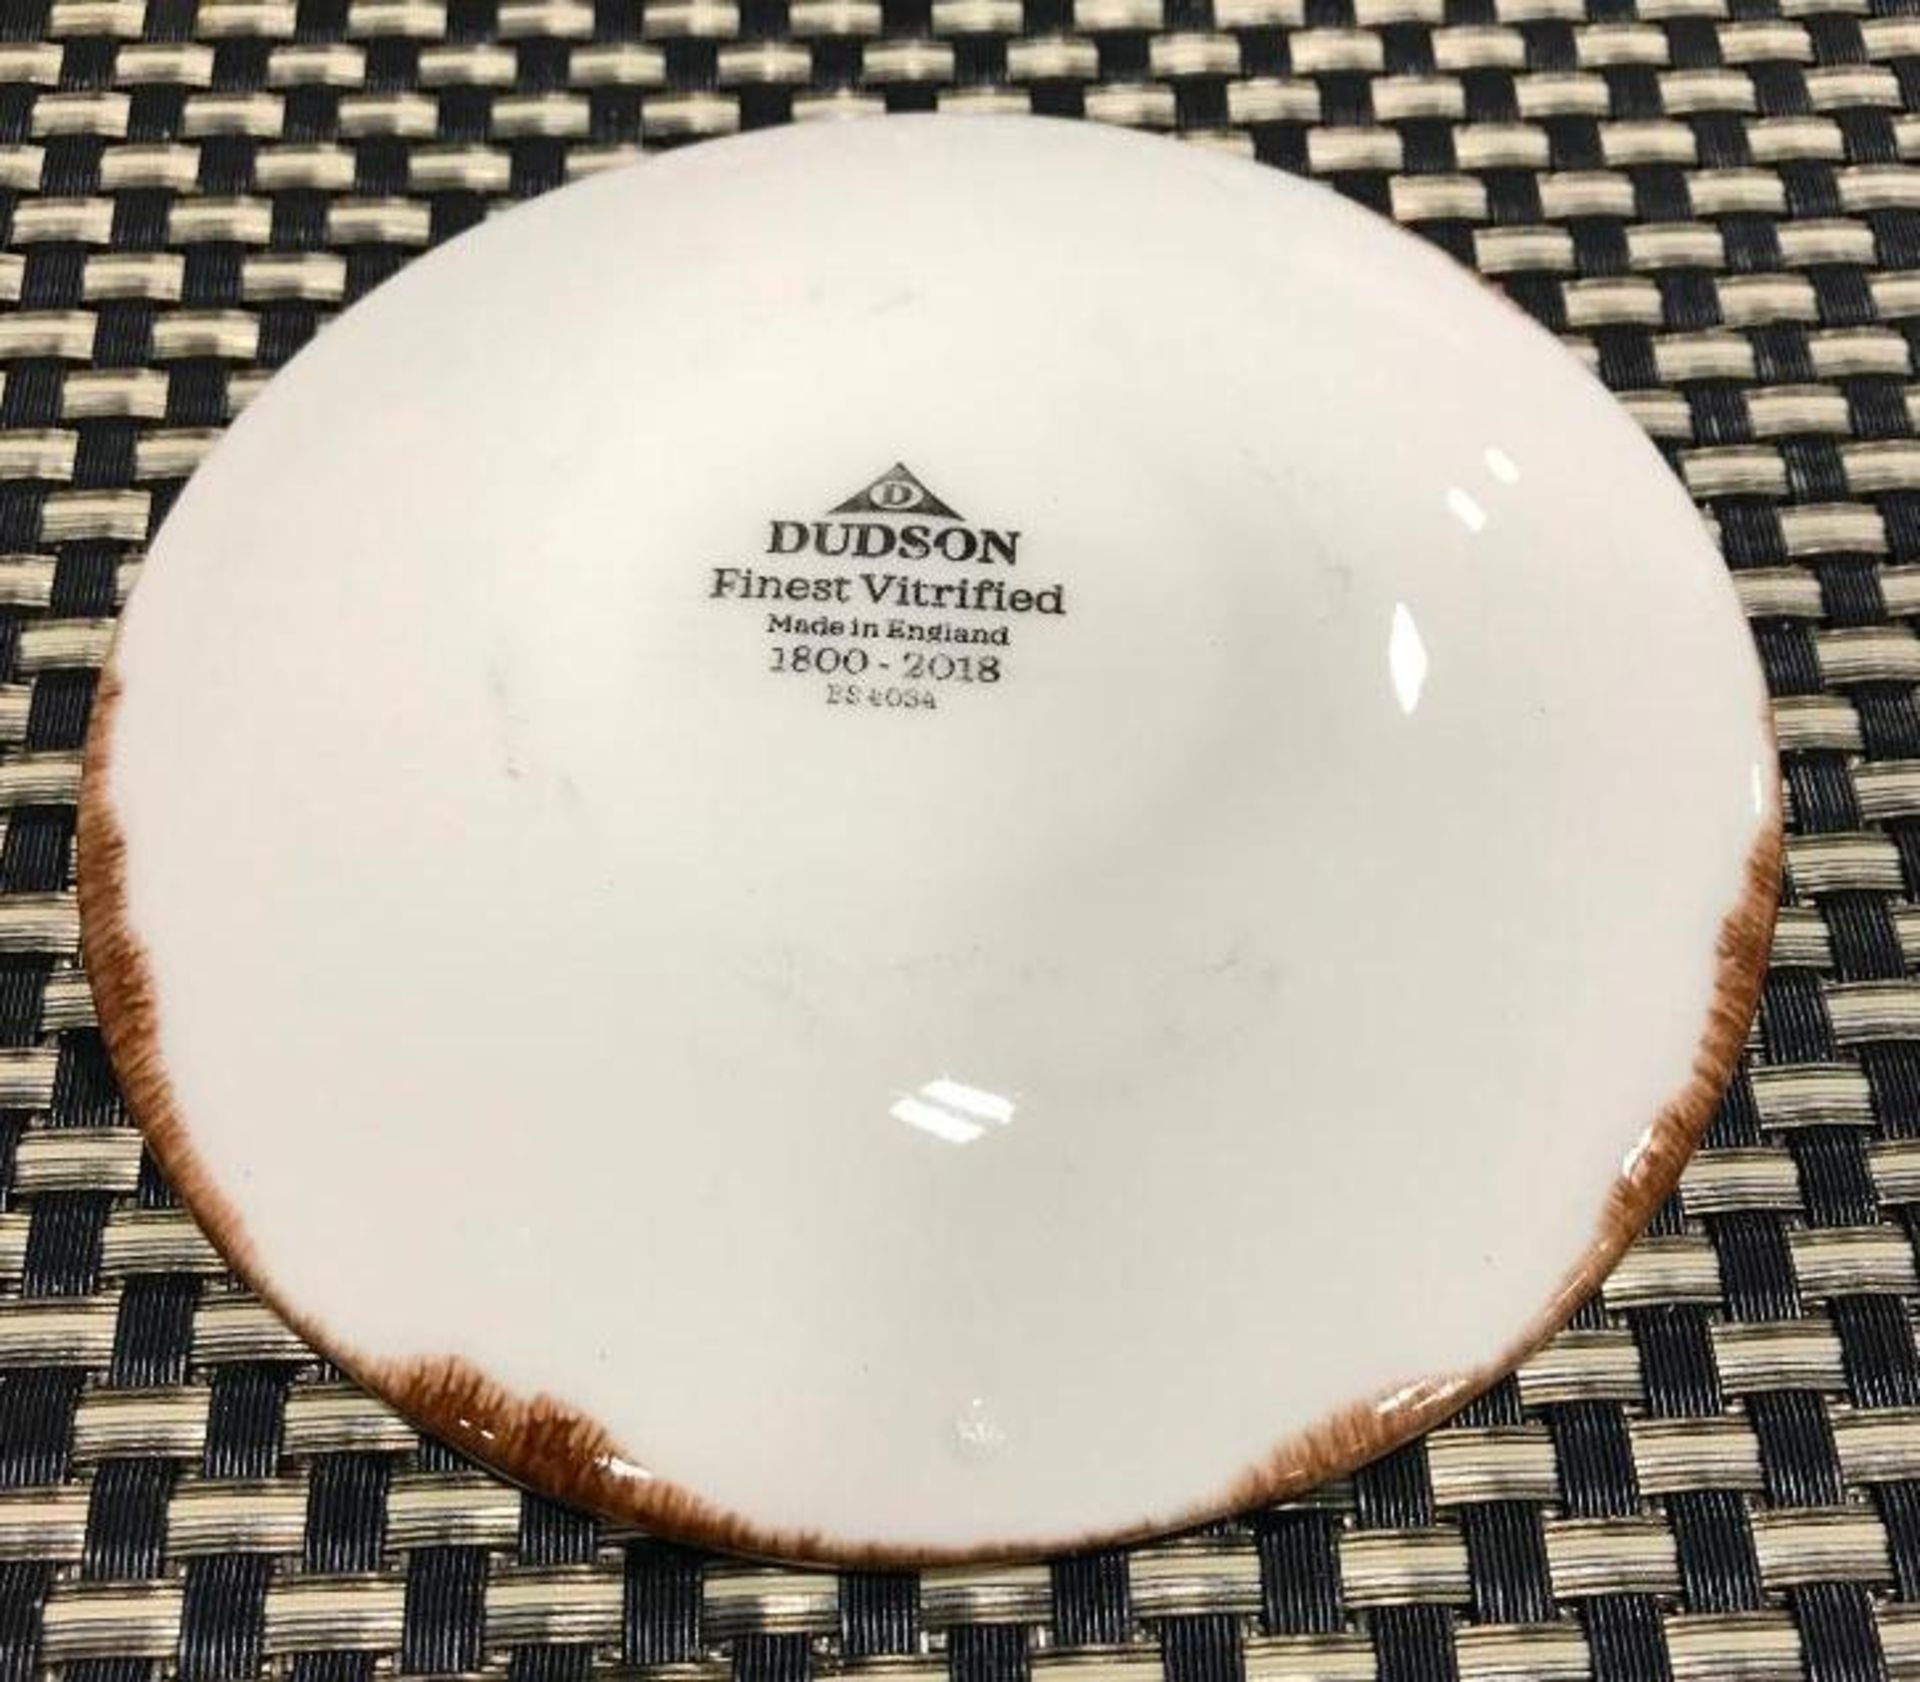 DUDSON HARVEST NATURAL PLATE 5.5" -12/CASE, MADE IN ENGLAND - Image 4 of 5